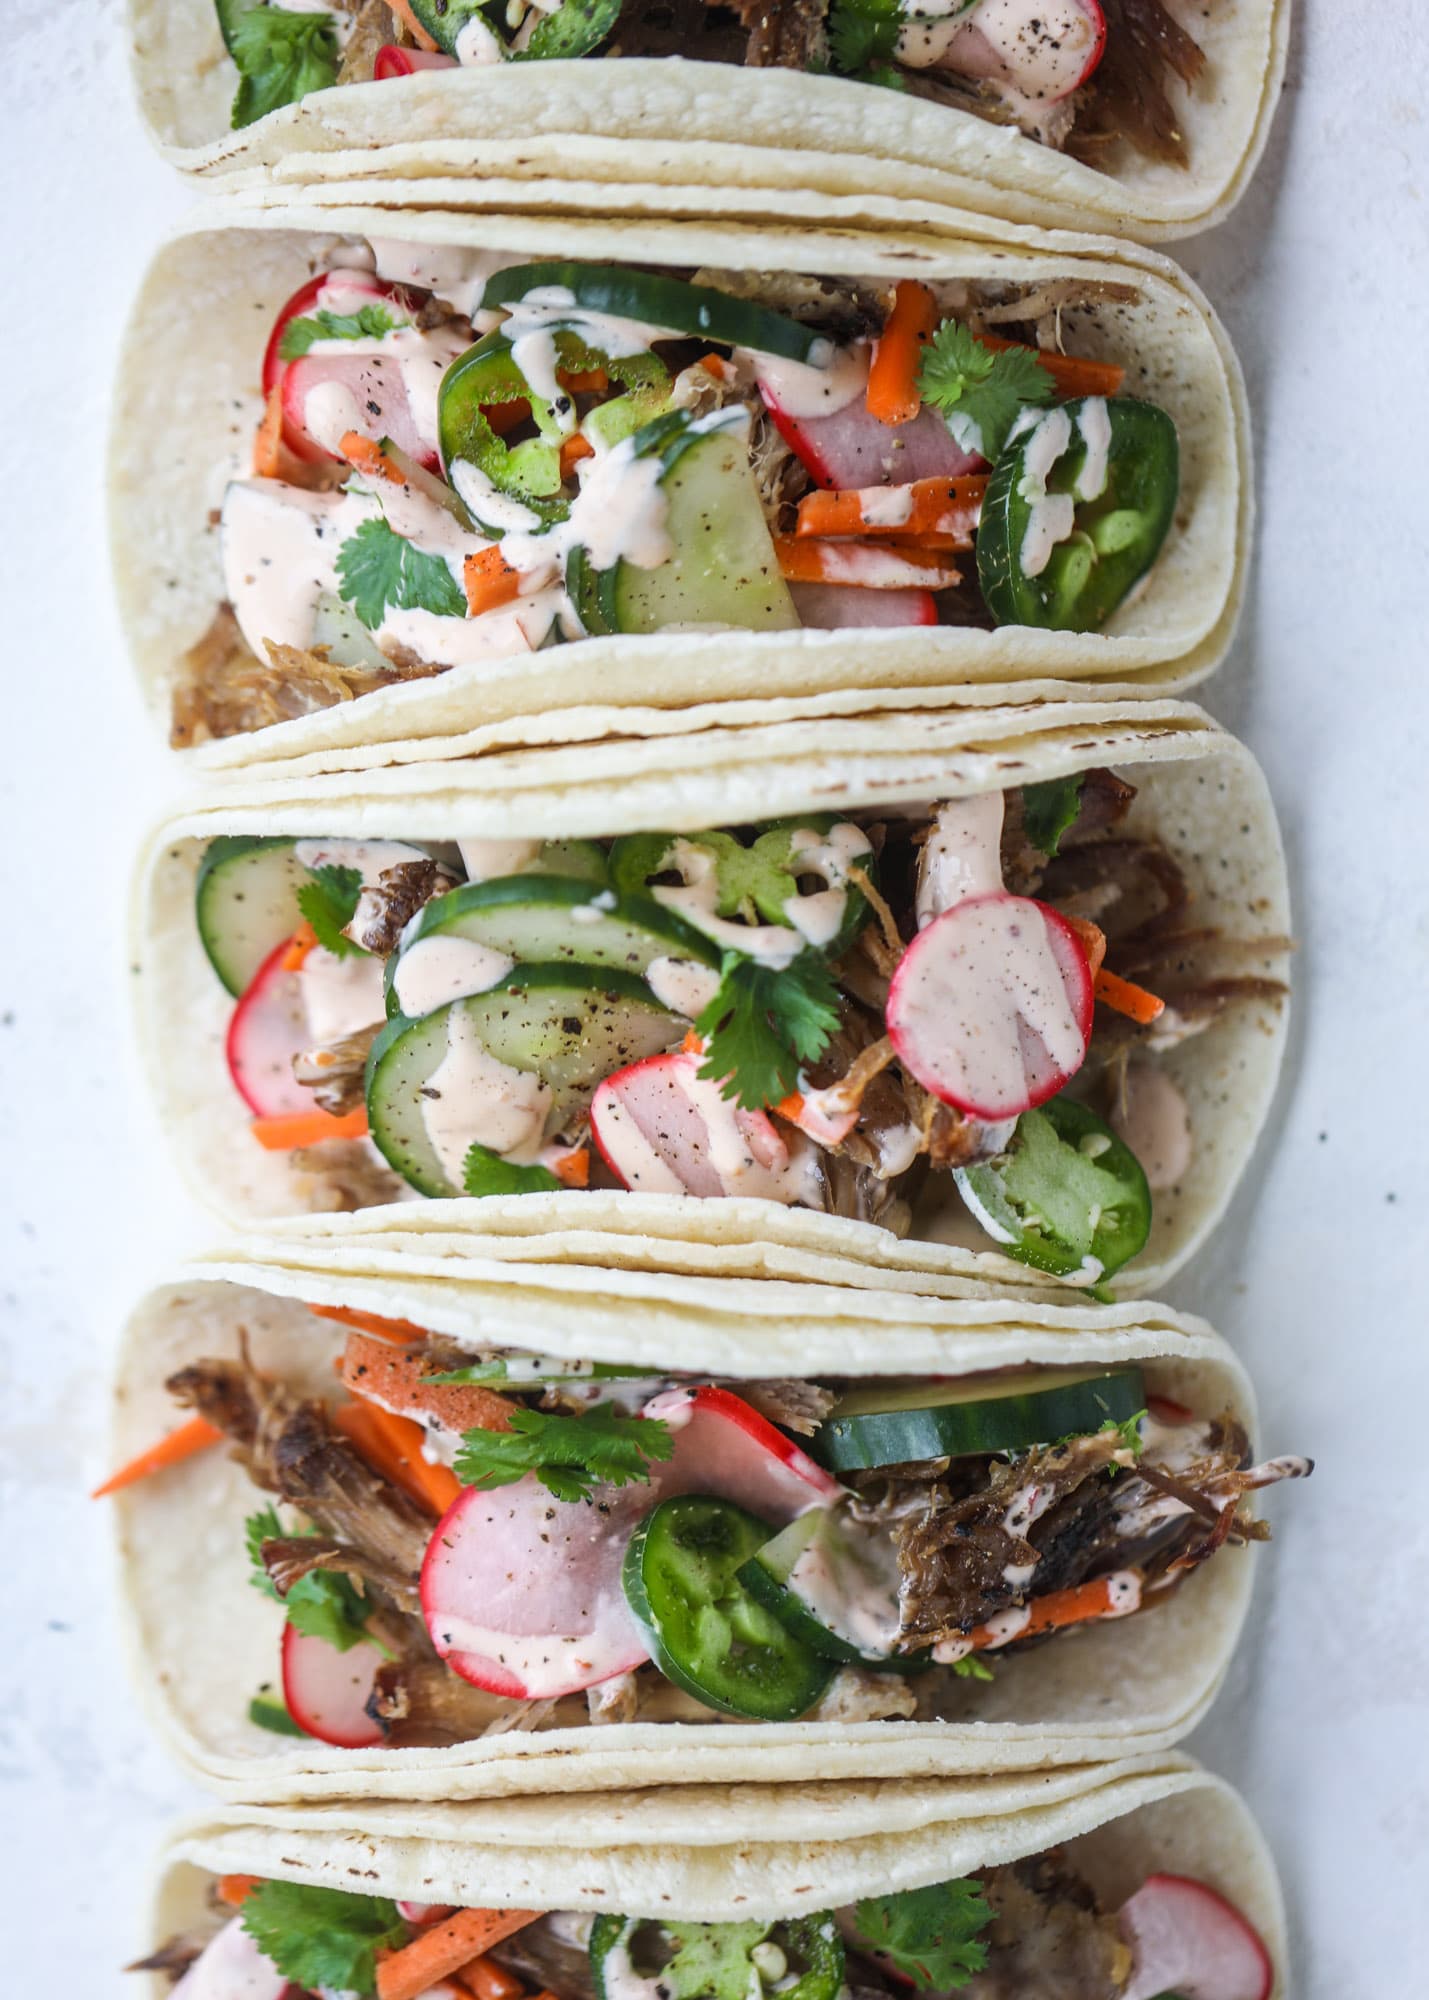 These bahn mi tacos are the perfect twist on the classic sandwich! Juicy pulled pork, pickled veggies, a tangy crema and loads of flavor. Bahn mi tacos are a delish weeknight meal or also work great if you have pork leftovers! I howsweeteats.com #bahn #mi #tacos #pork #dinner